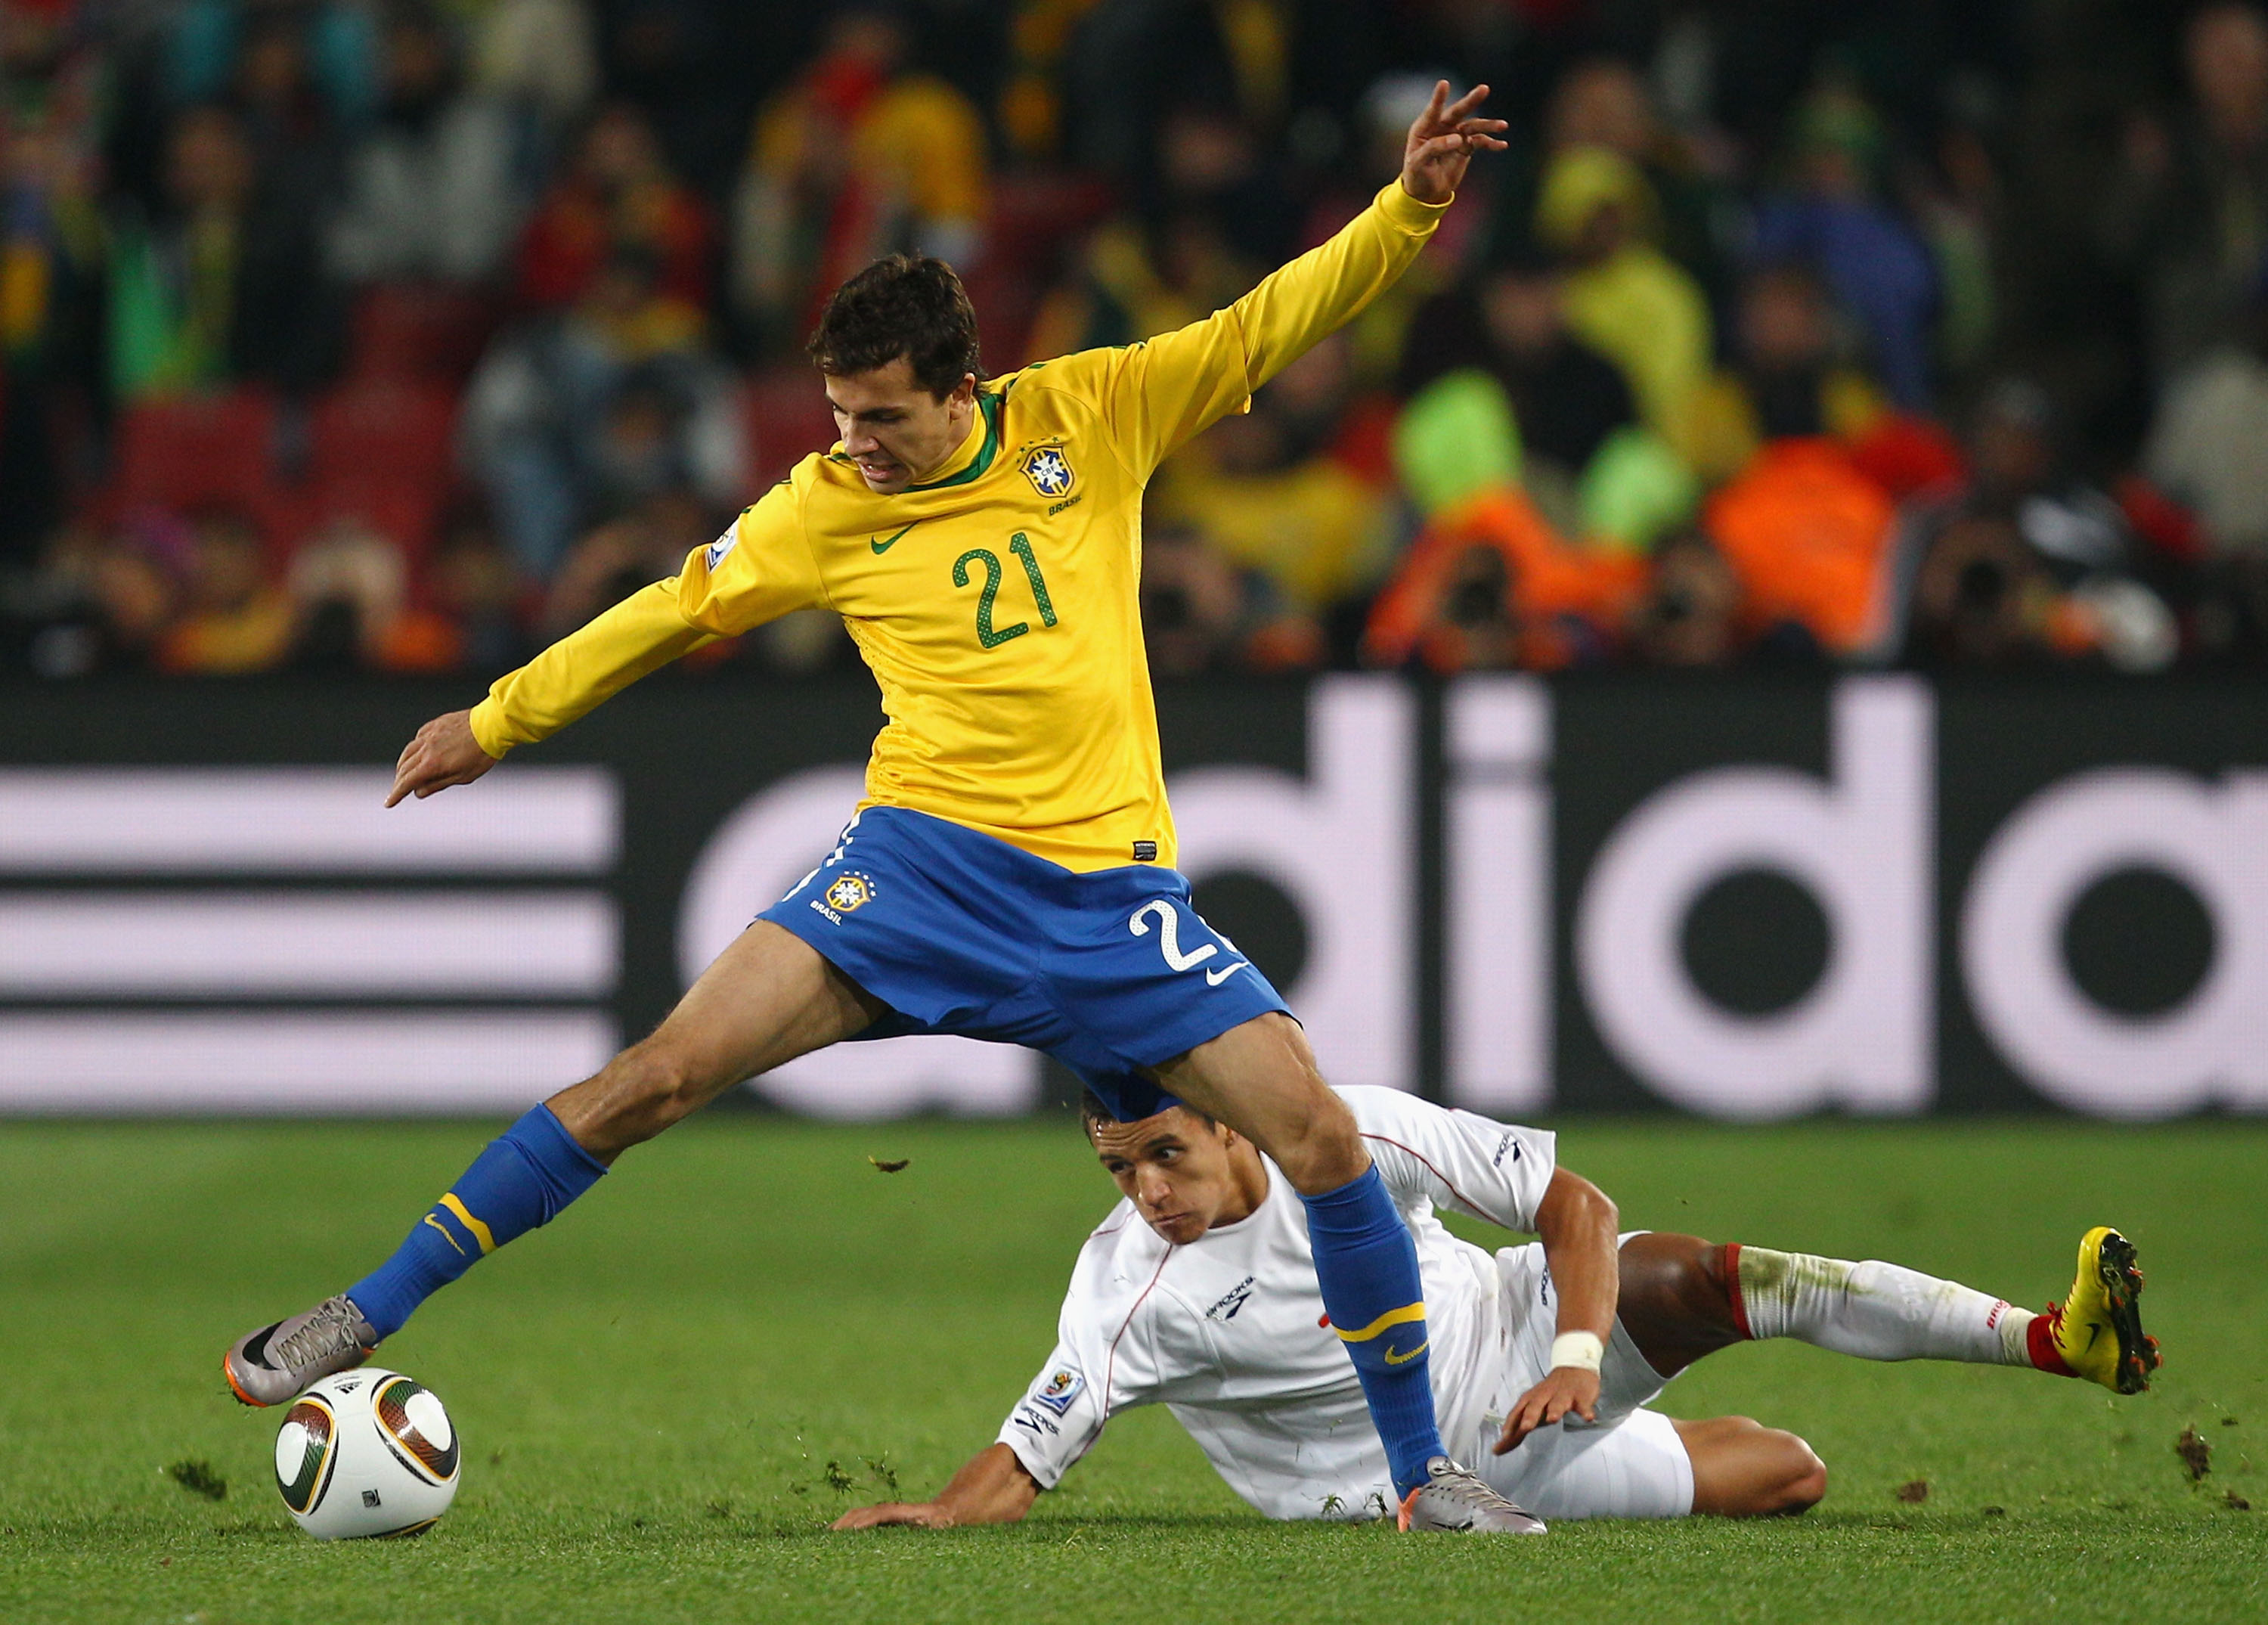 JOHANNESBURG, SOUTH AFRICA - JUNE 28: Nilmar of Brazil controls the ball with Alexis Sanchez of Chile during the 2010 FIFA World Cup South Africa Round of Sixteen match between Brazil and Chile at Ellis Park Stadium on June 28, 2010 in Johannesburg, South